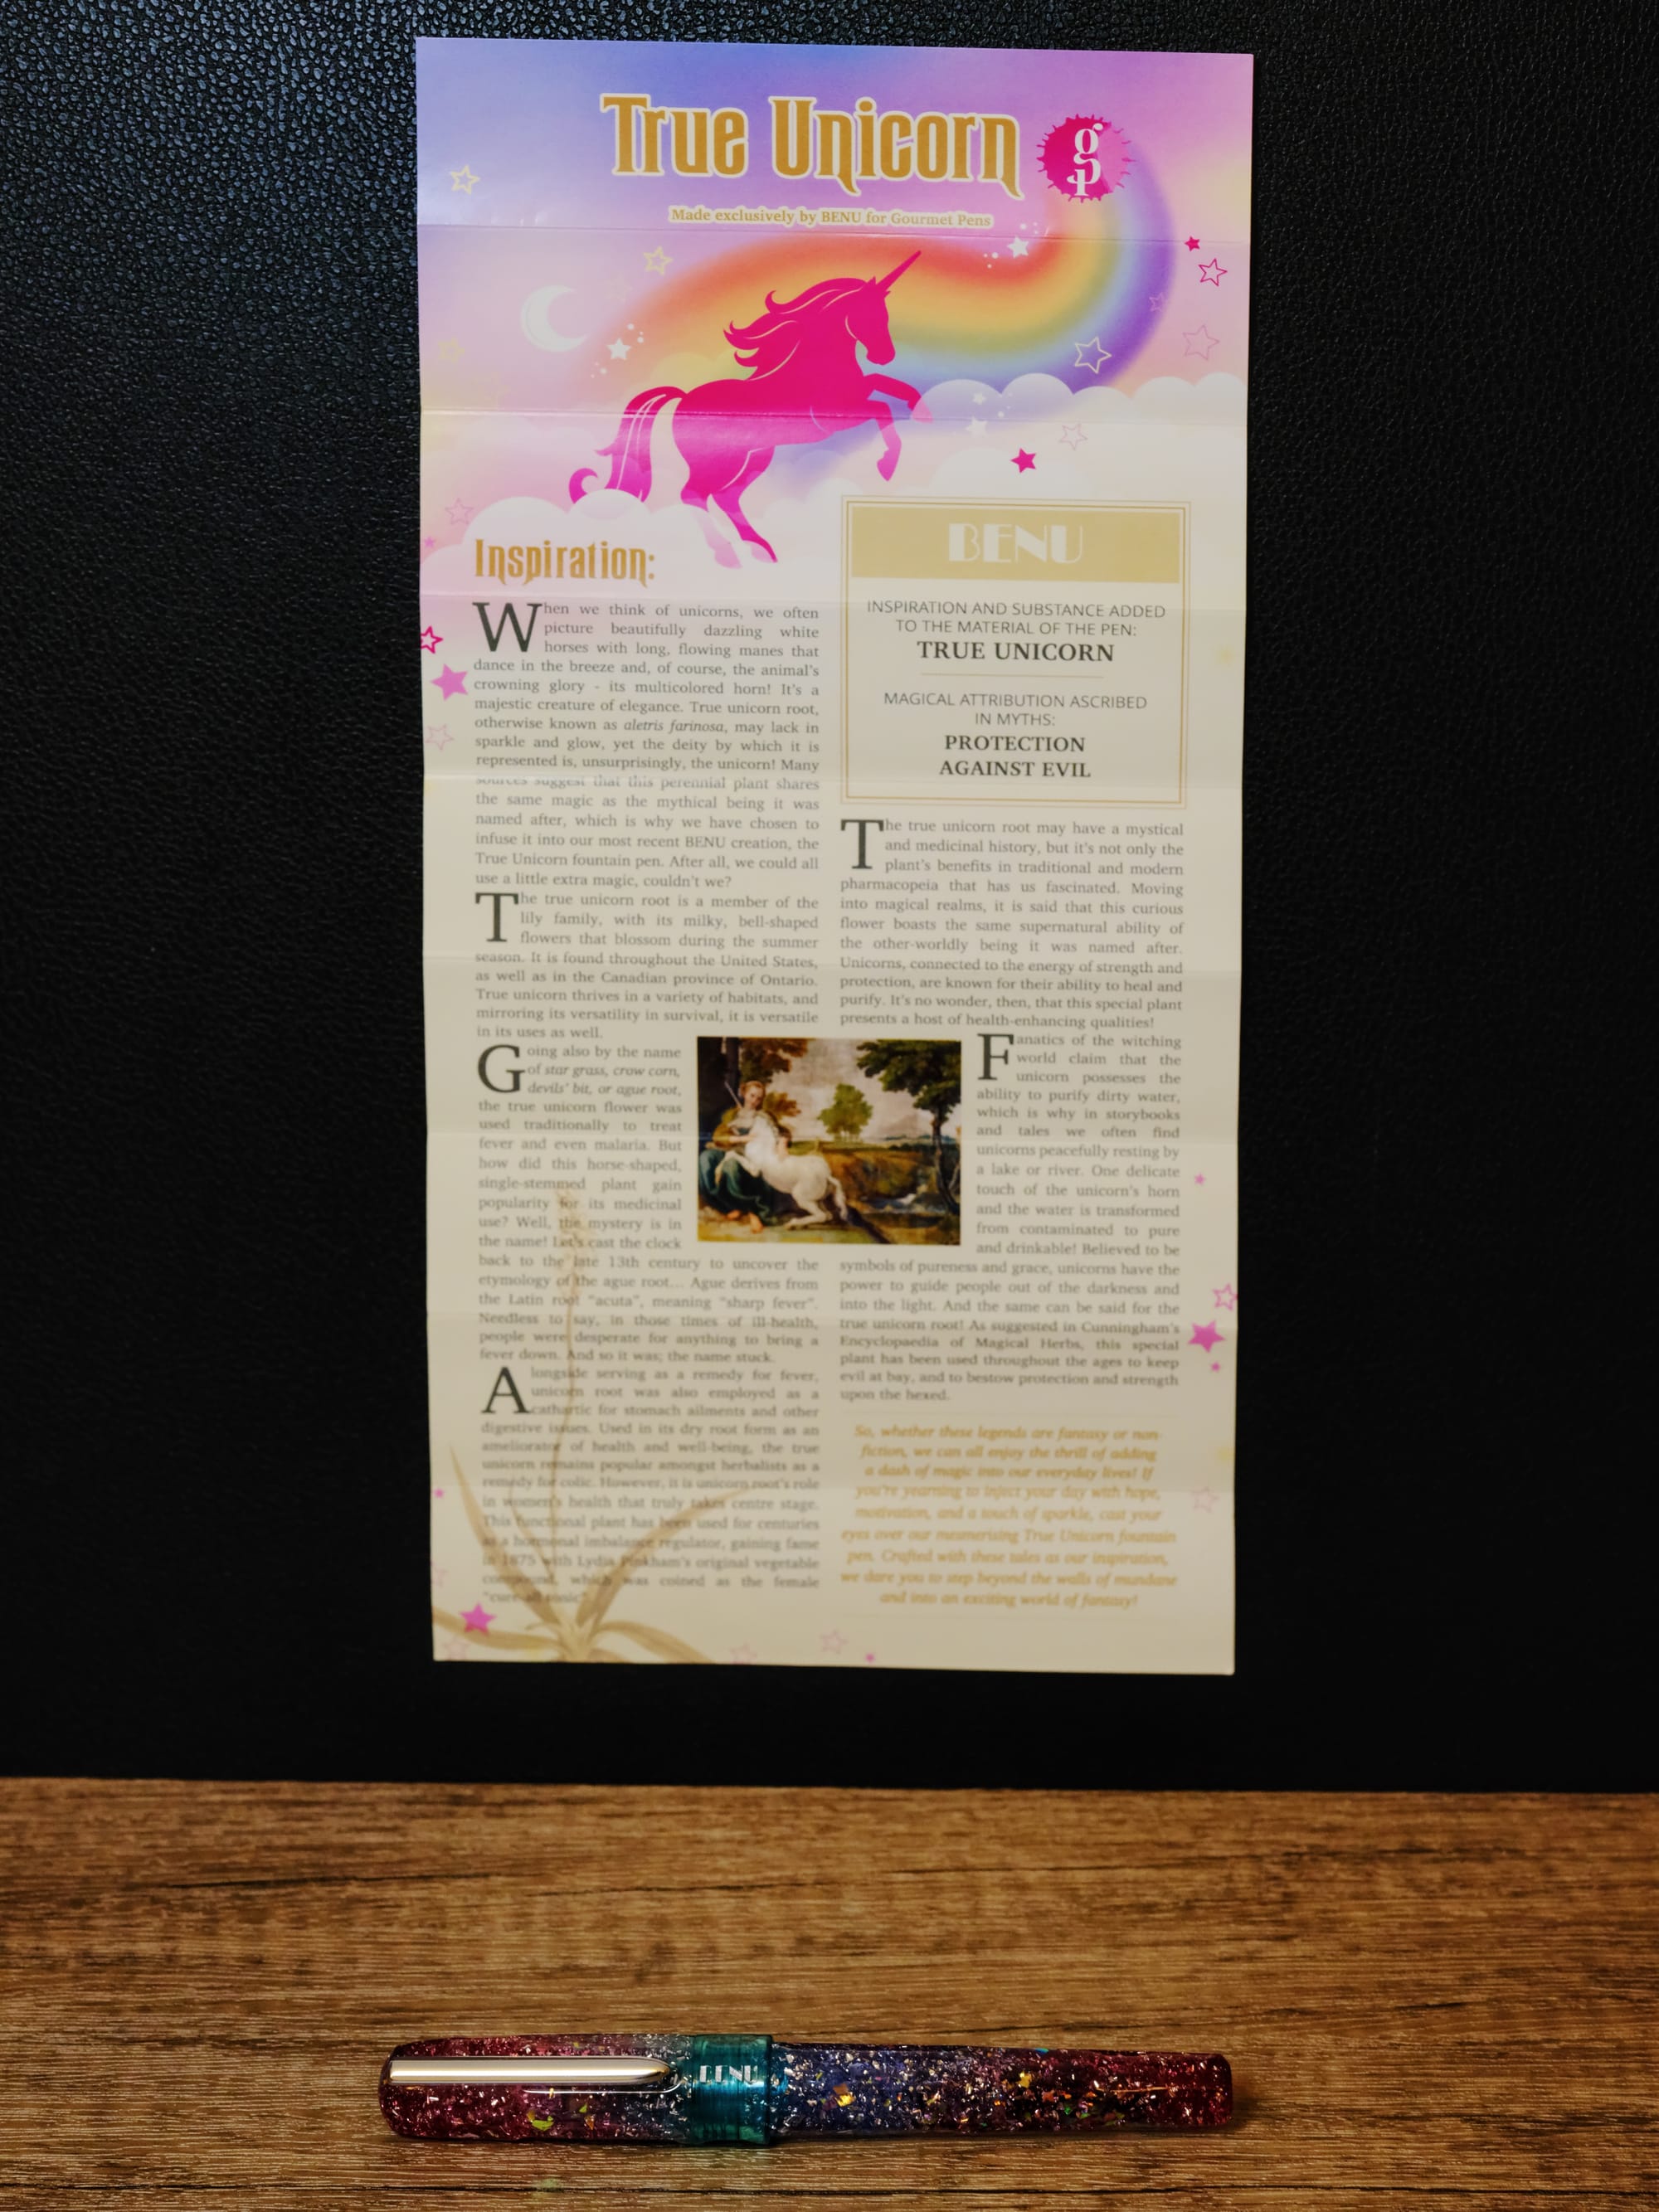 A text-heavy insert telling the story about the True Unicorn pen and its namesake root on a black background above the glittery, multicolored fountain pen sitting on a brown wood patterned surface